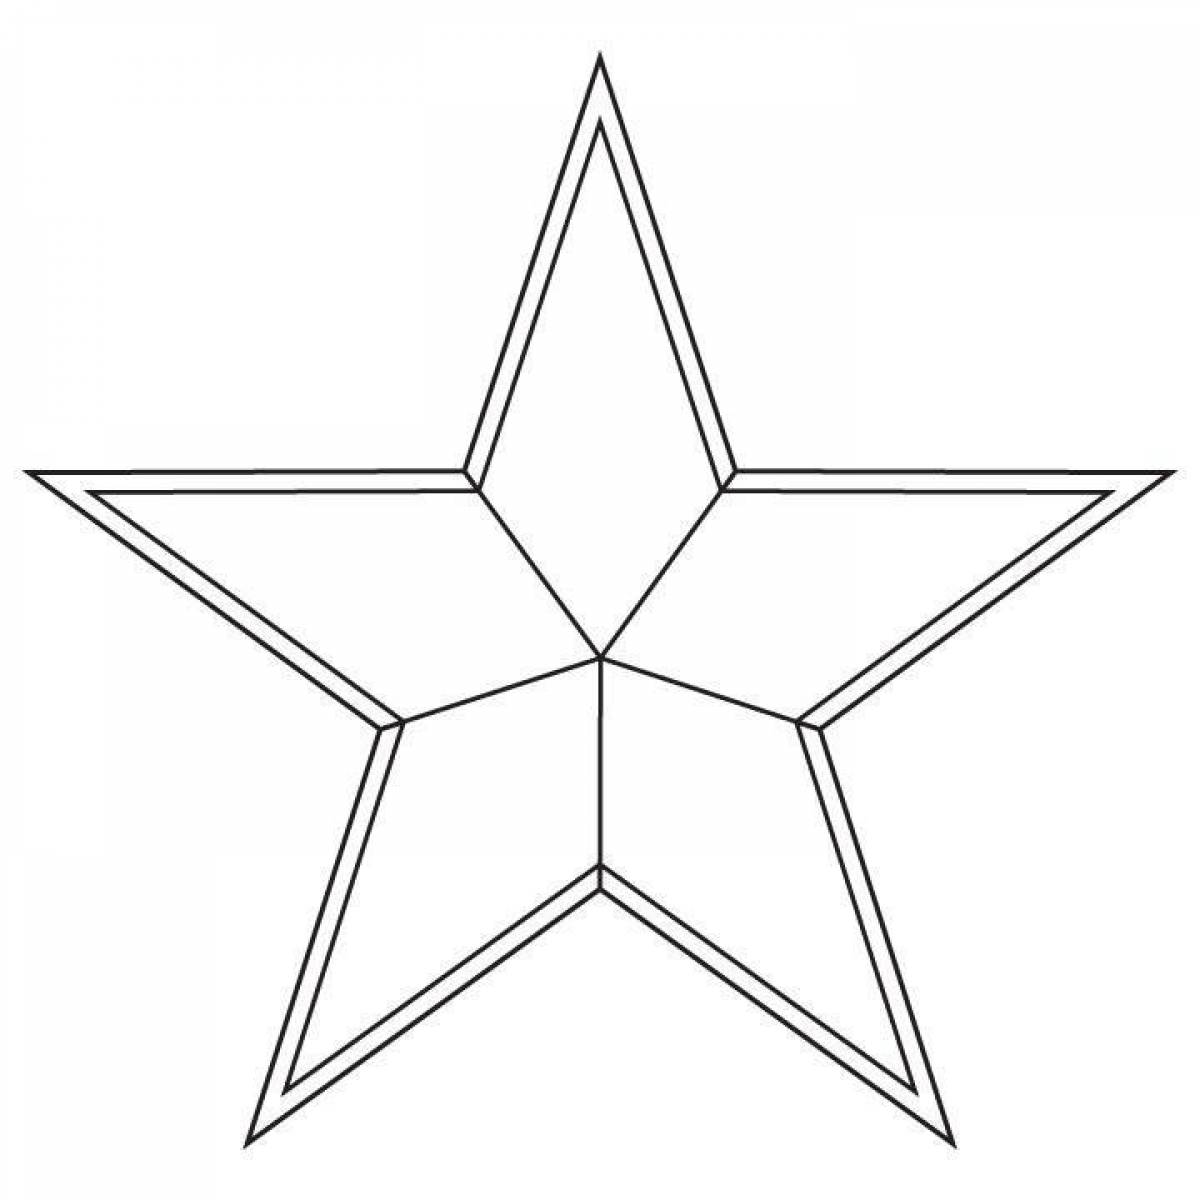 Amazing coloring page with stars